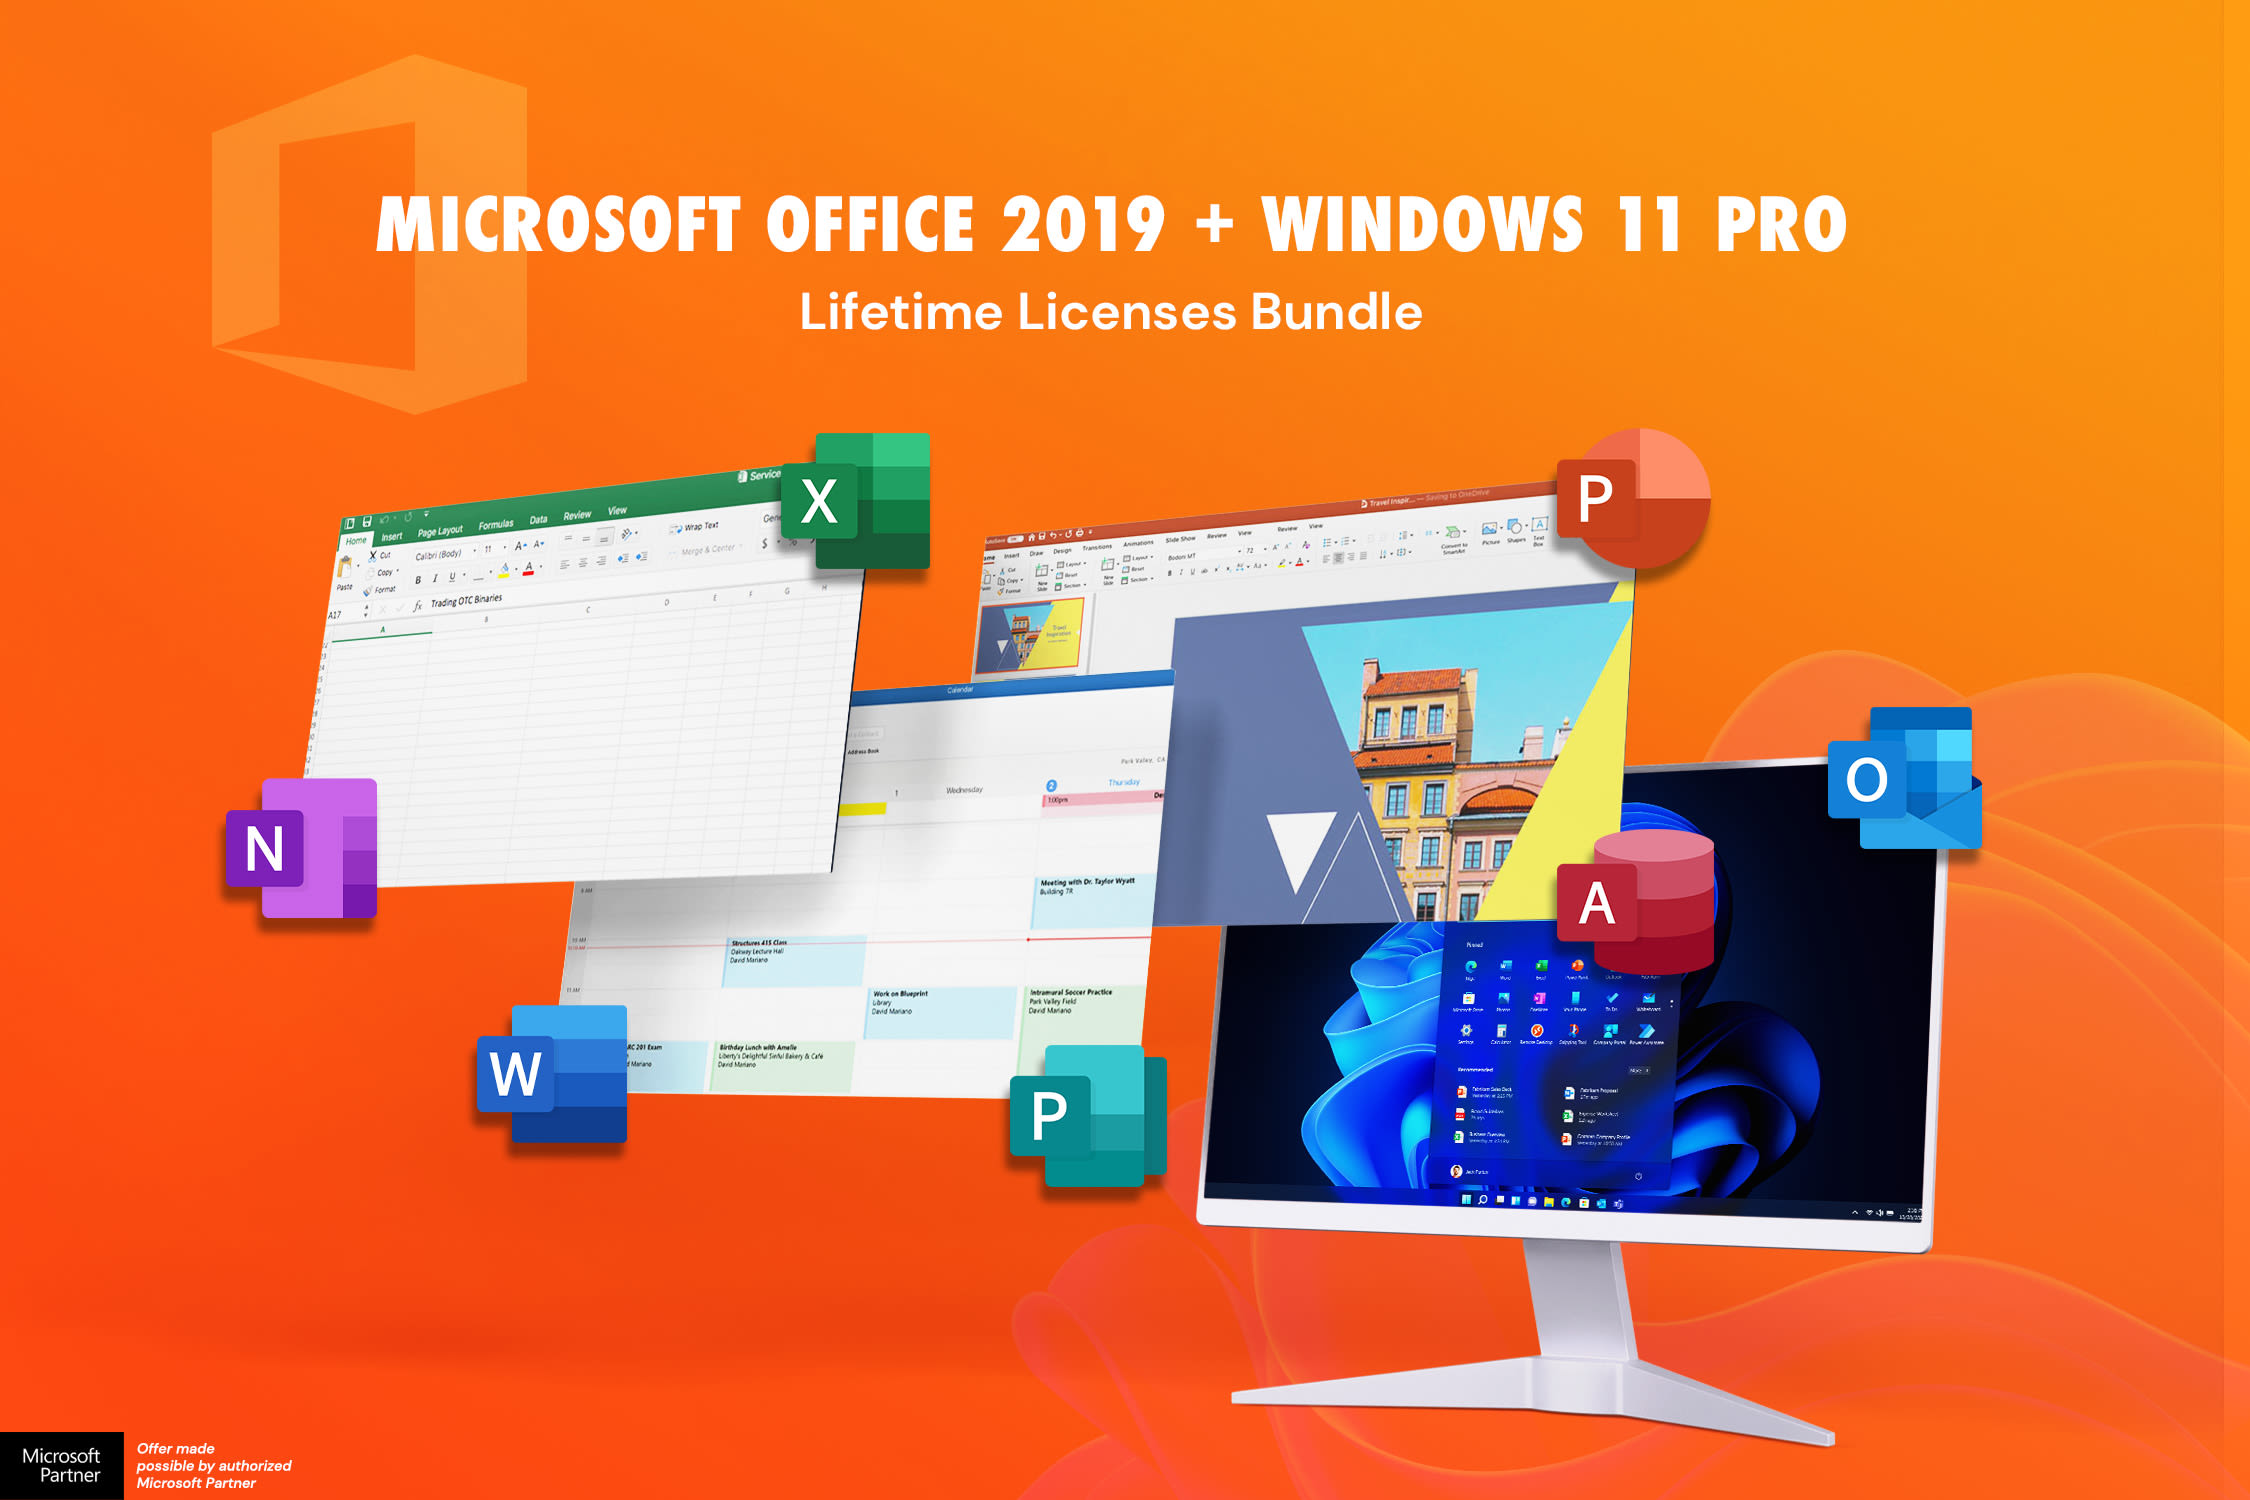 Here's how to get Microsoft Office and Windows 11 Pro for under $50